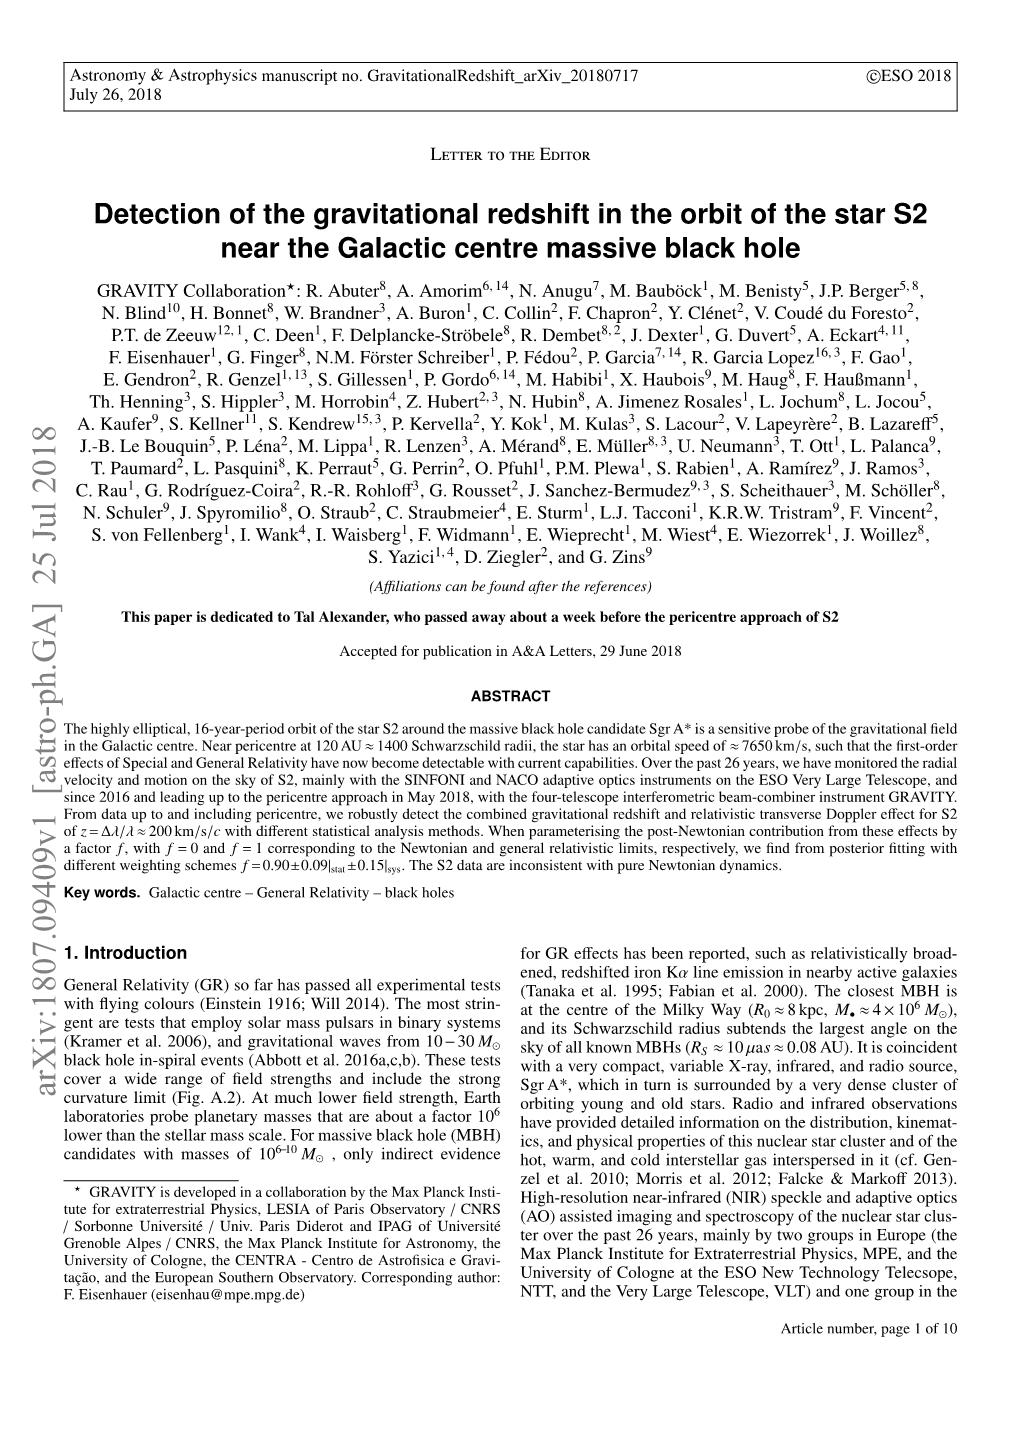 Detection of the Gravitational Redshift in the Orbit of the Star S2 Near the Galactic Centre Massive Black Hole GRAVITY Collaboration?: R